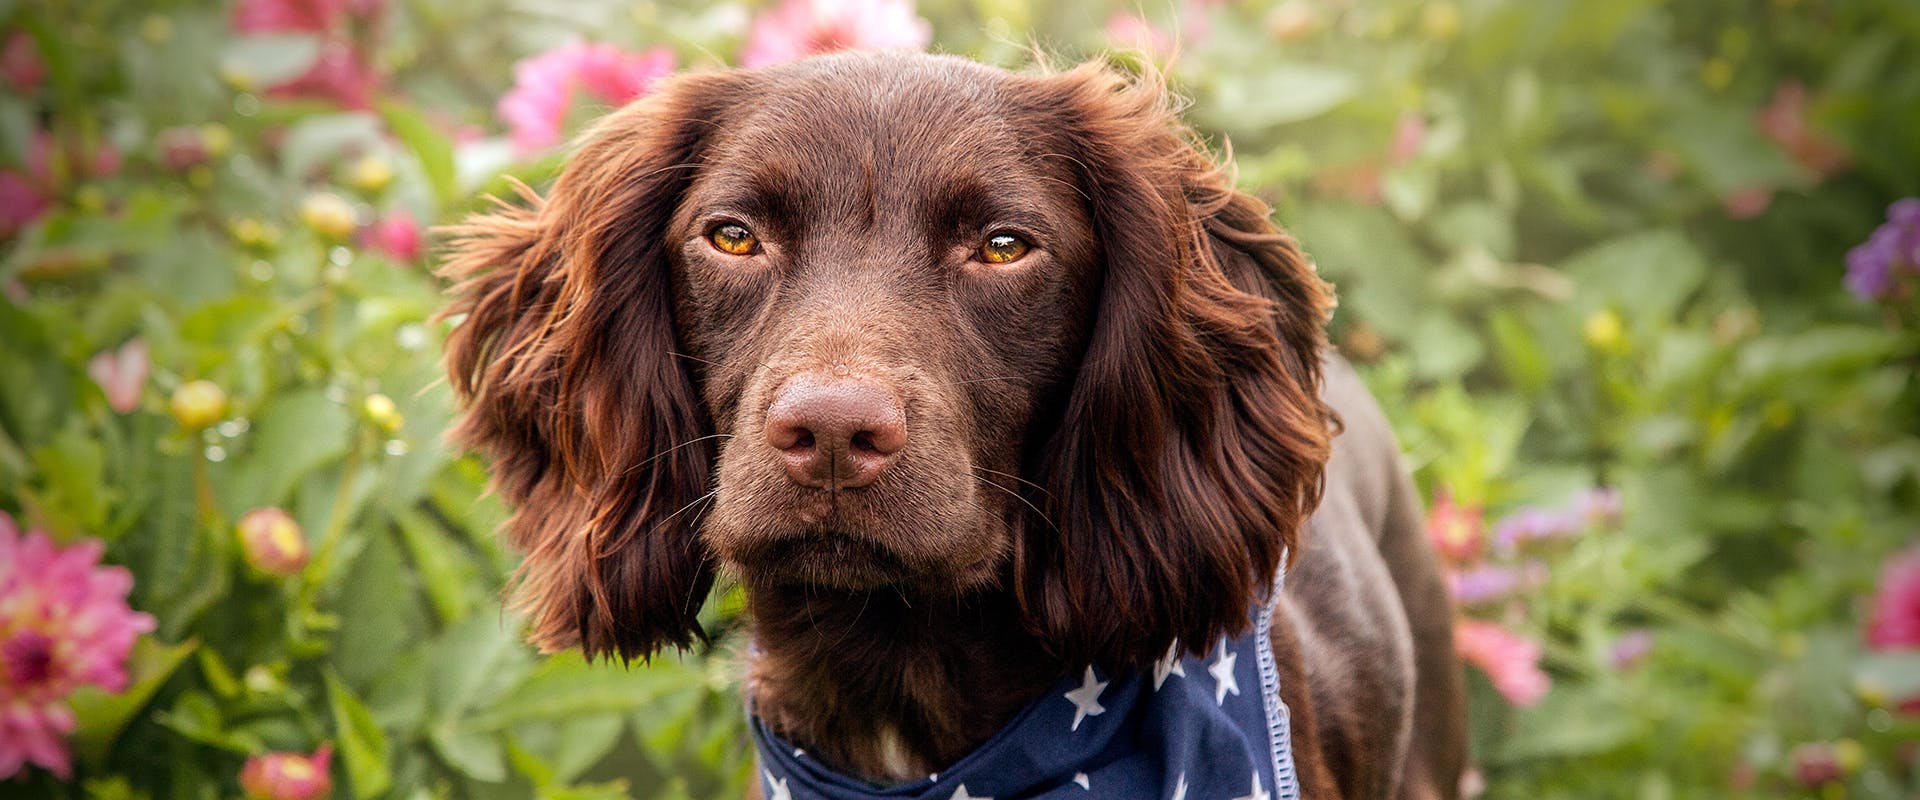 A brown Sprocker Spaniel dog standing in a field of flowers